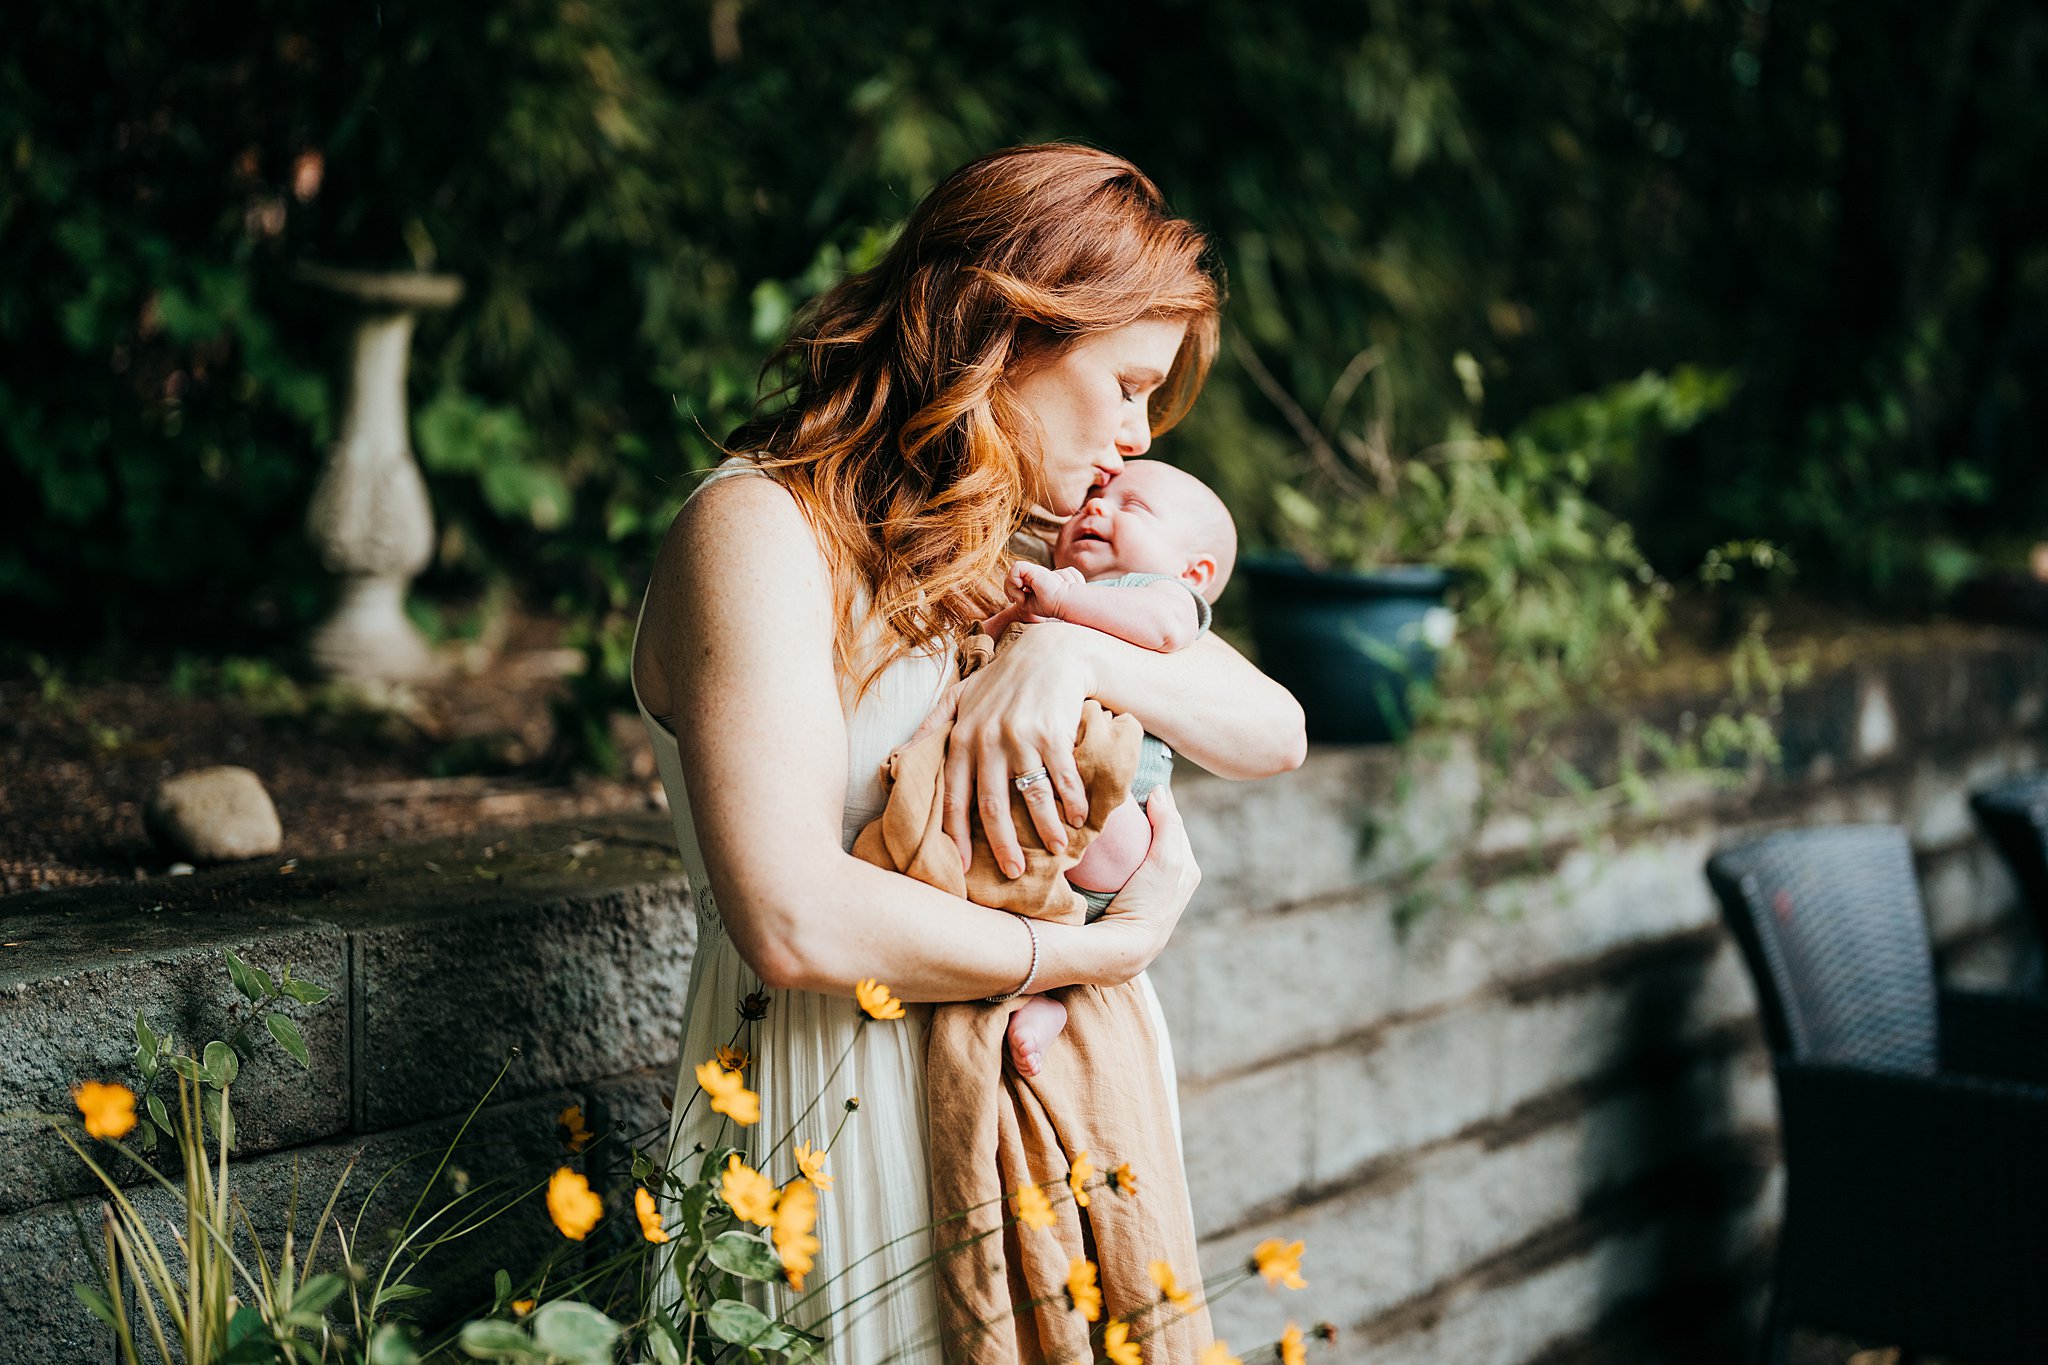 A mother in a white dress kisses her smiling newborn baby in her arms Seattle doulas